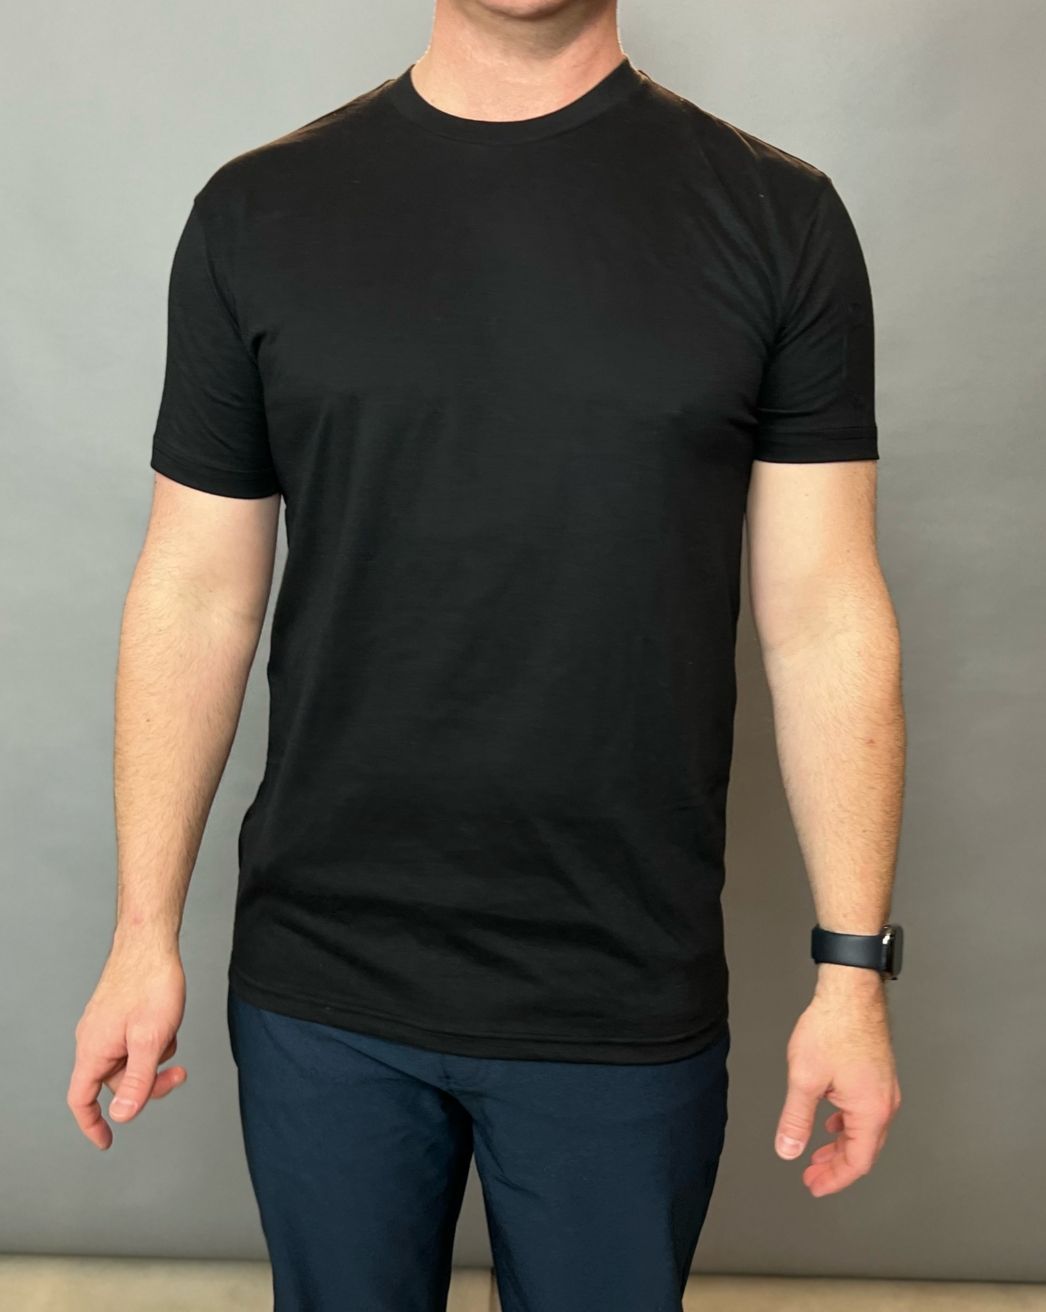 True Classic Tees Review: Don't buy before checking out our review 8